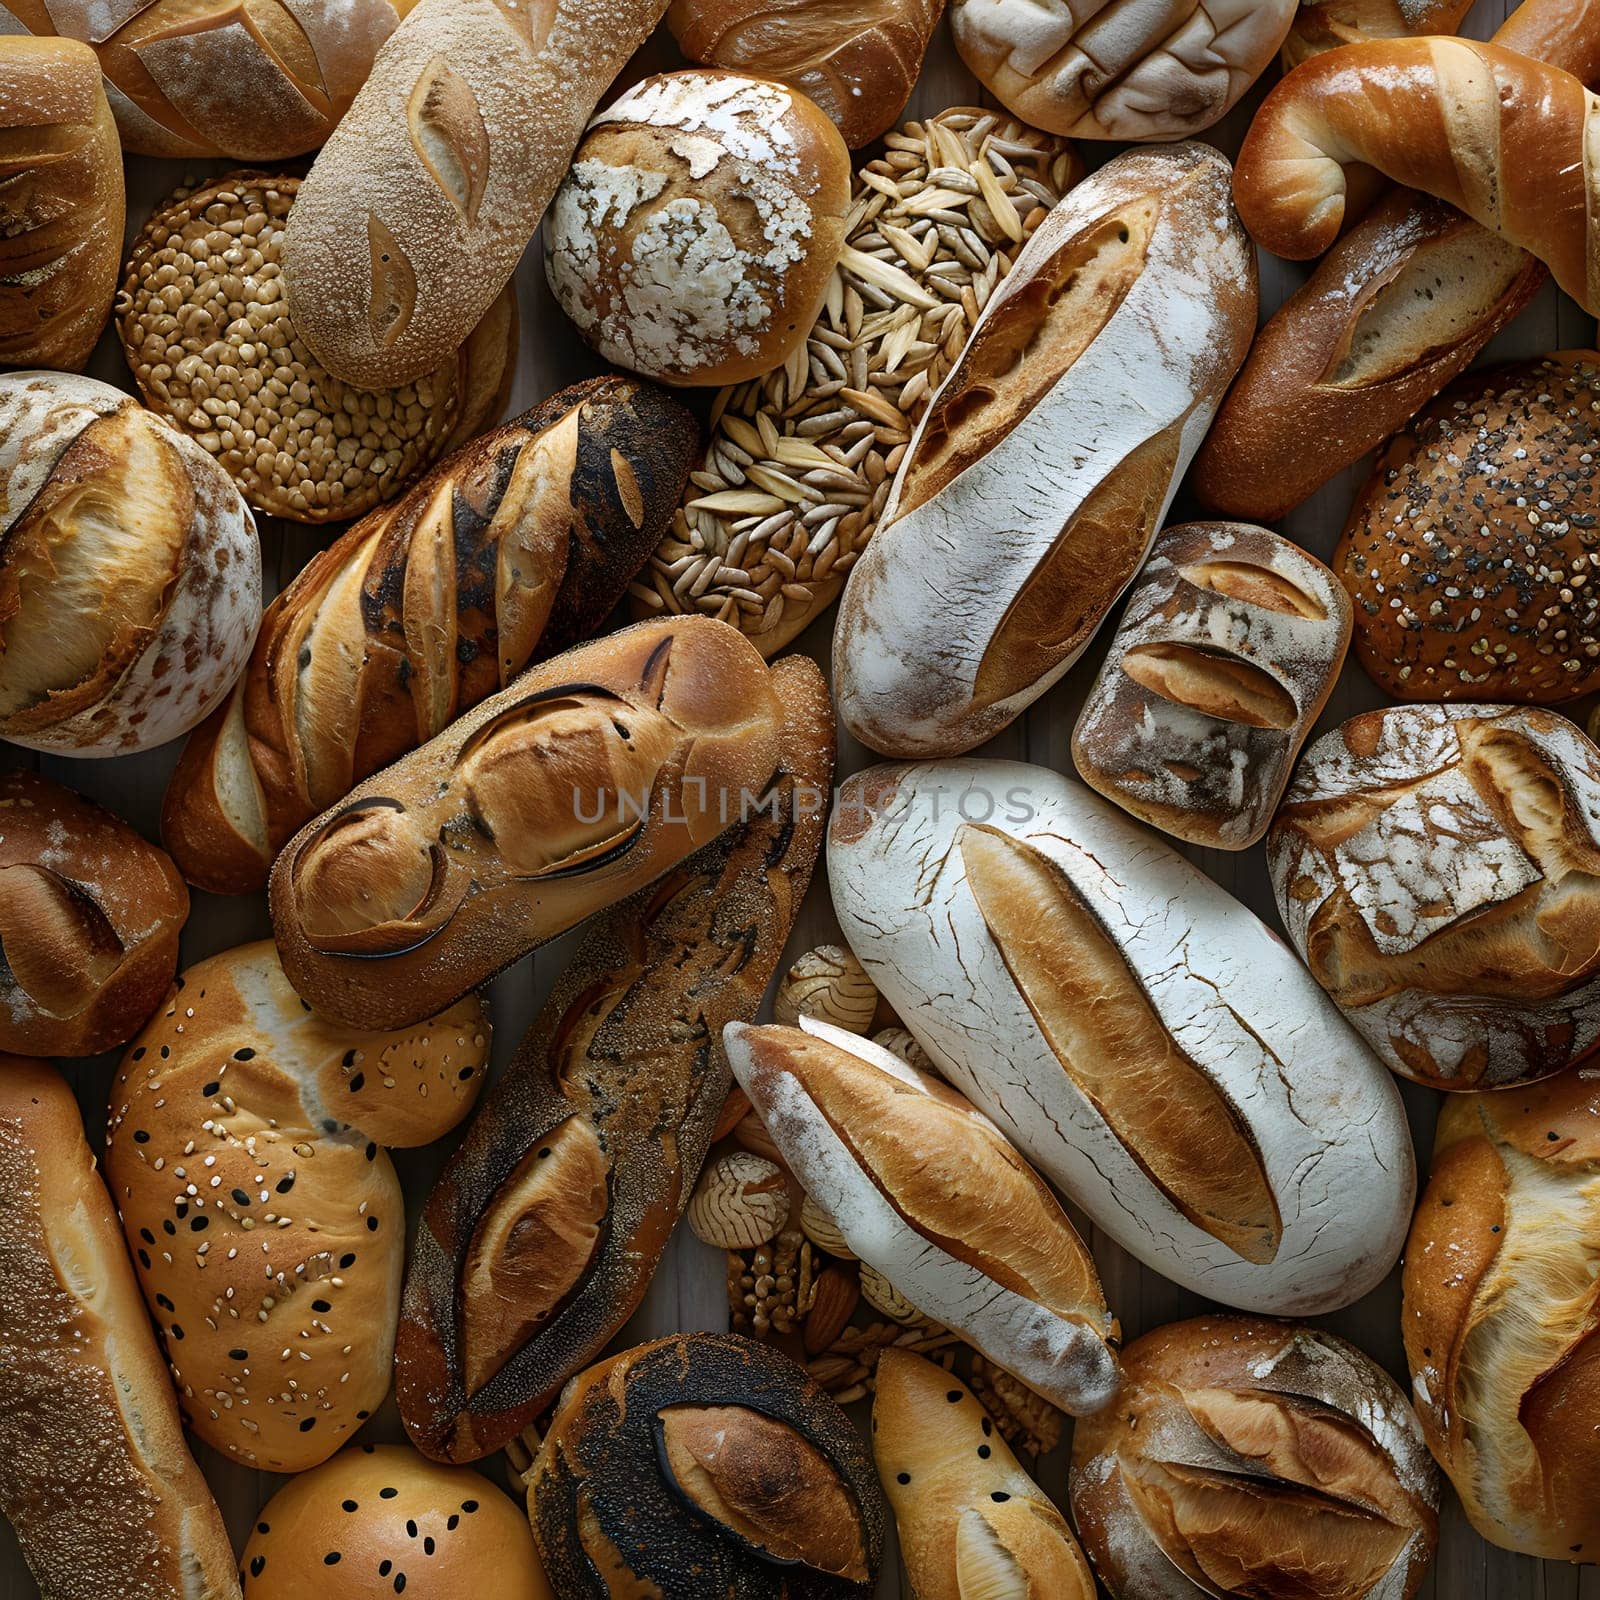 An assortment of various types of bread displayed on a wooden table, showcasing staple foods made from natural ingredients and seeds in different cuisines